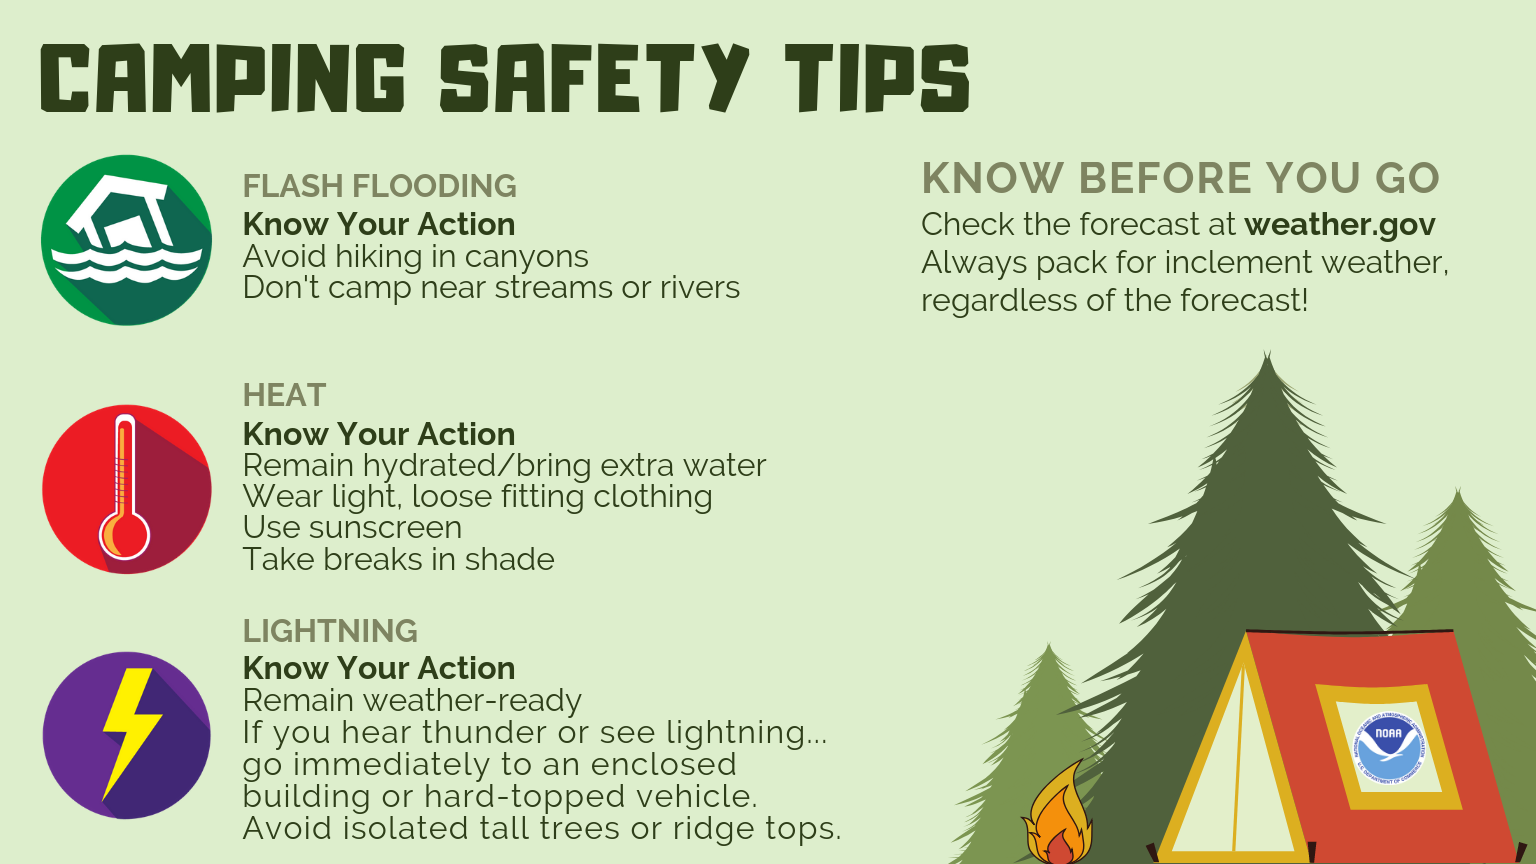 Ways to safe safe while hiking during severe weather season